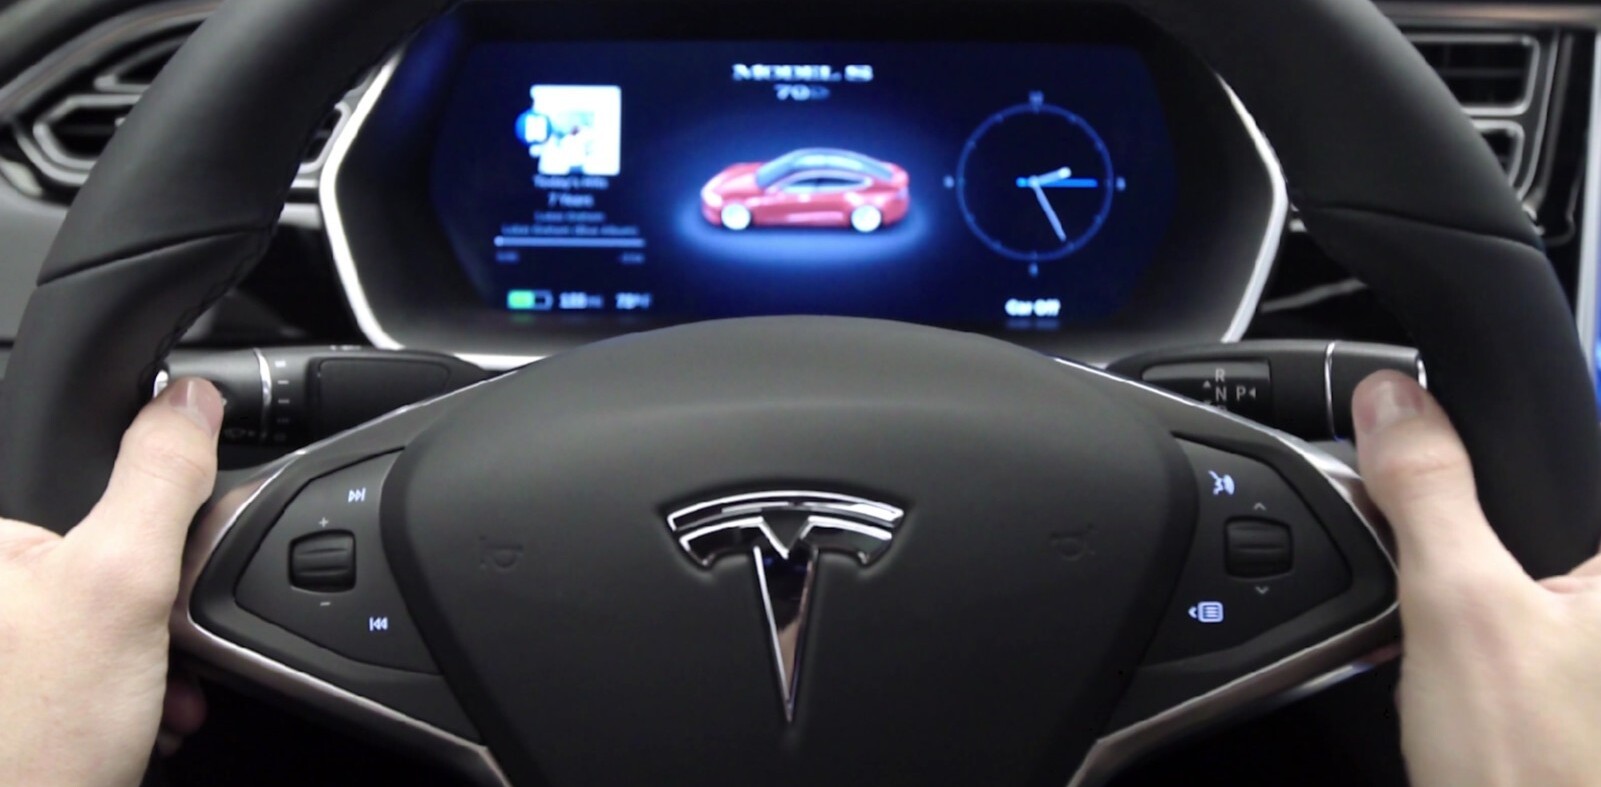 Why you shouldn’t expect Tesla’s ‘Full Self Driving’ to come out of beta any time soon